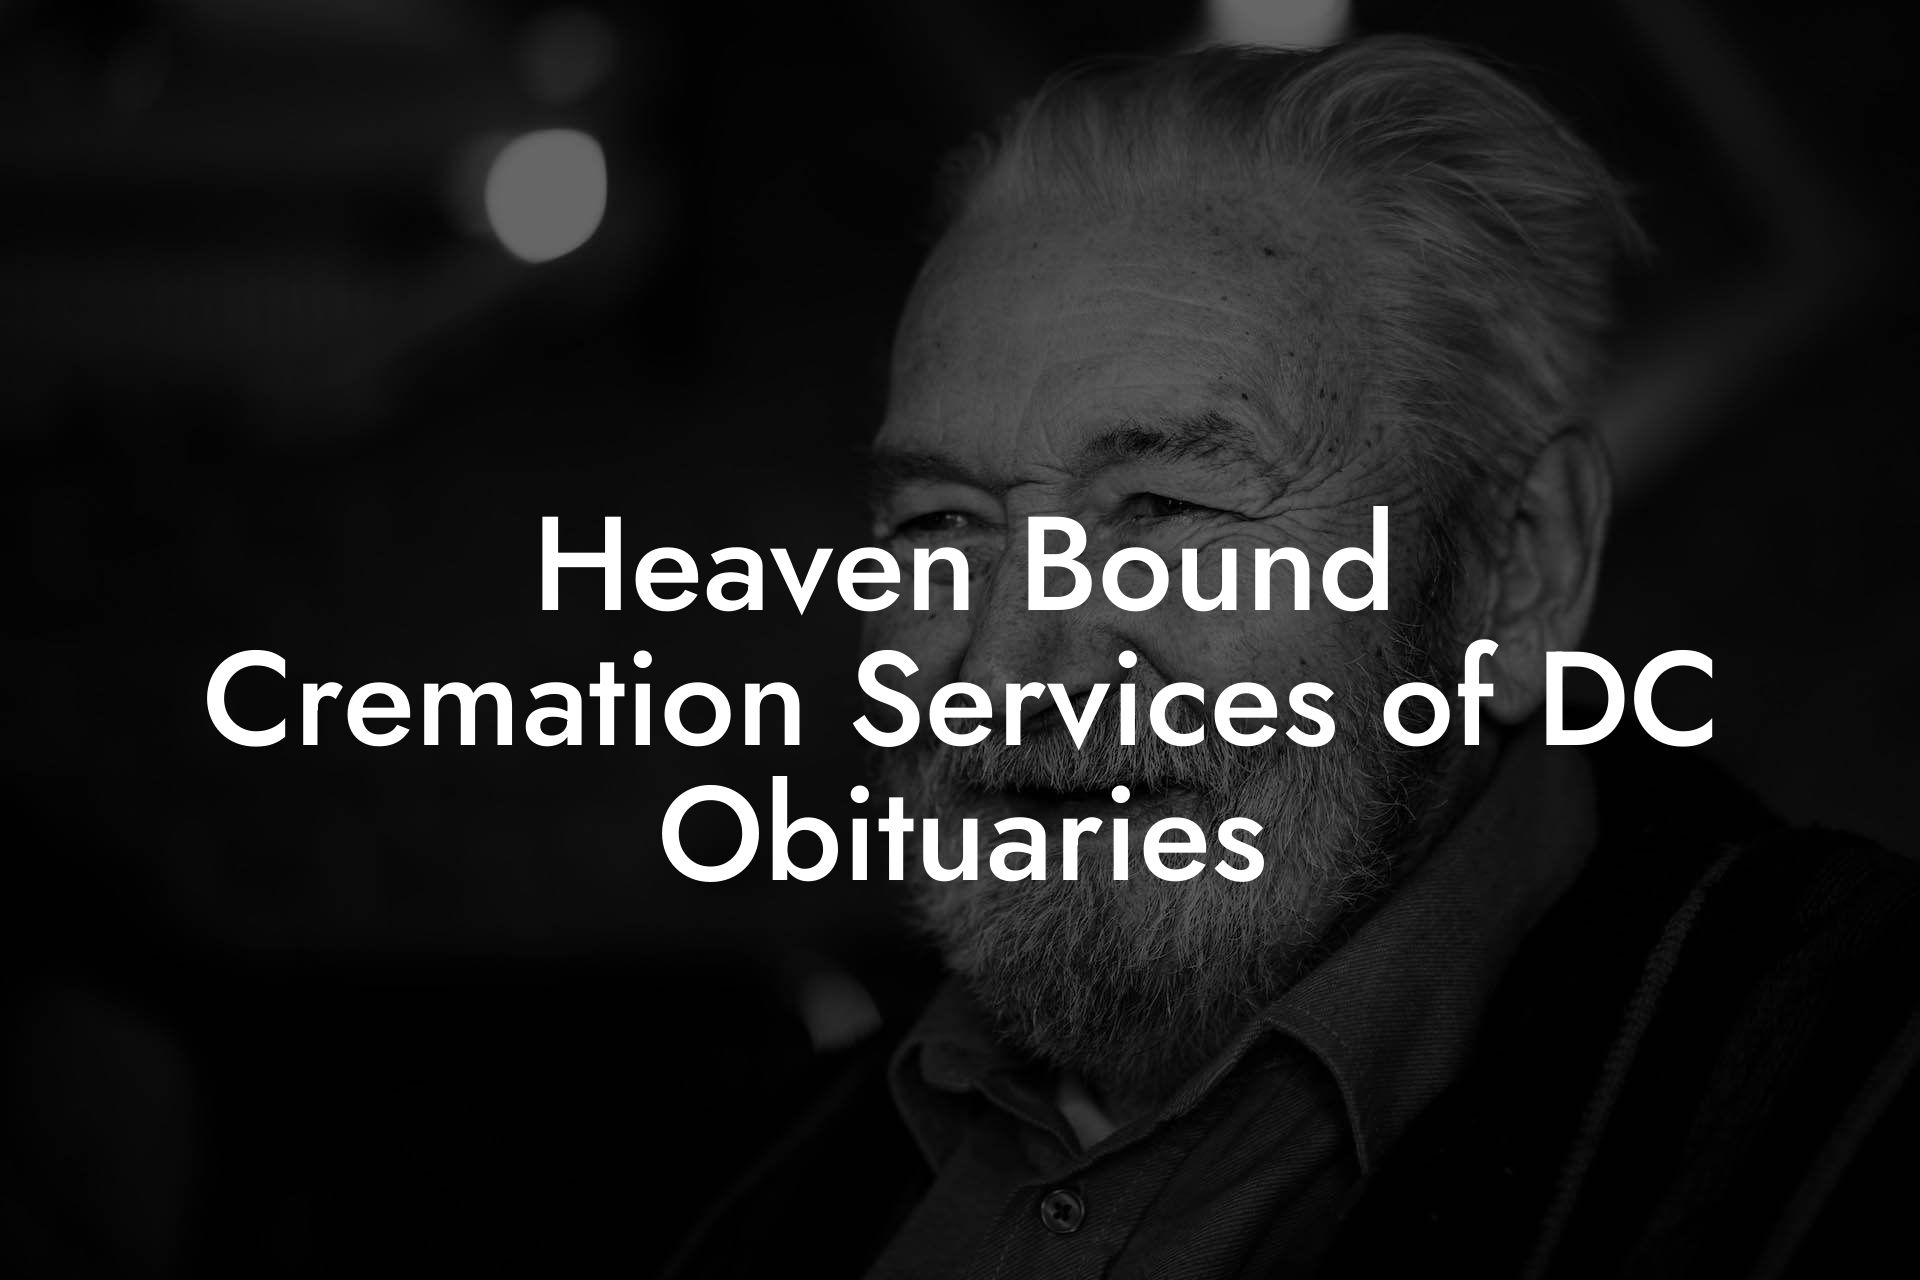 Heaven Bound Cremation Services of DC Obituaries